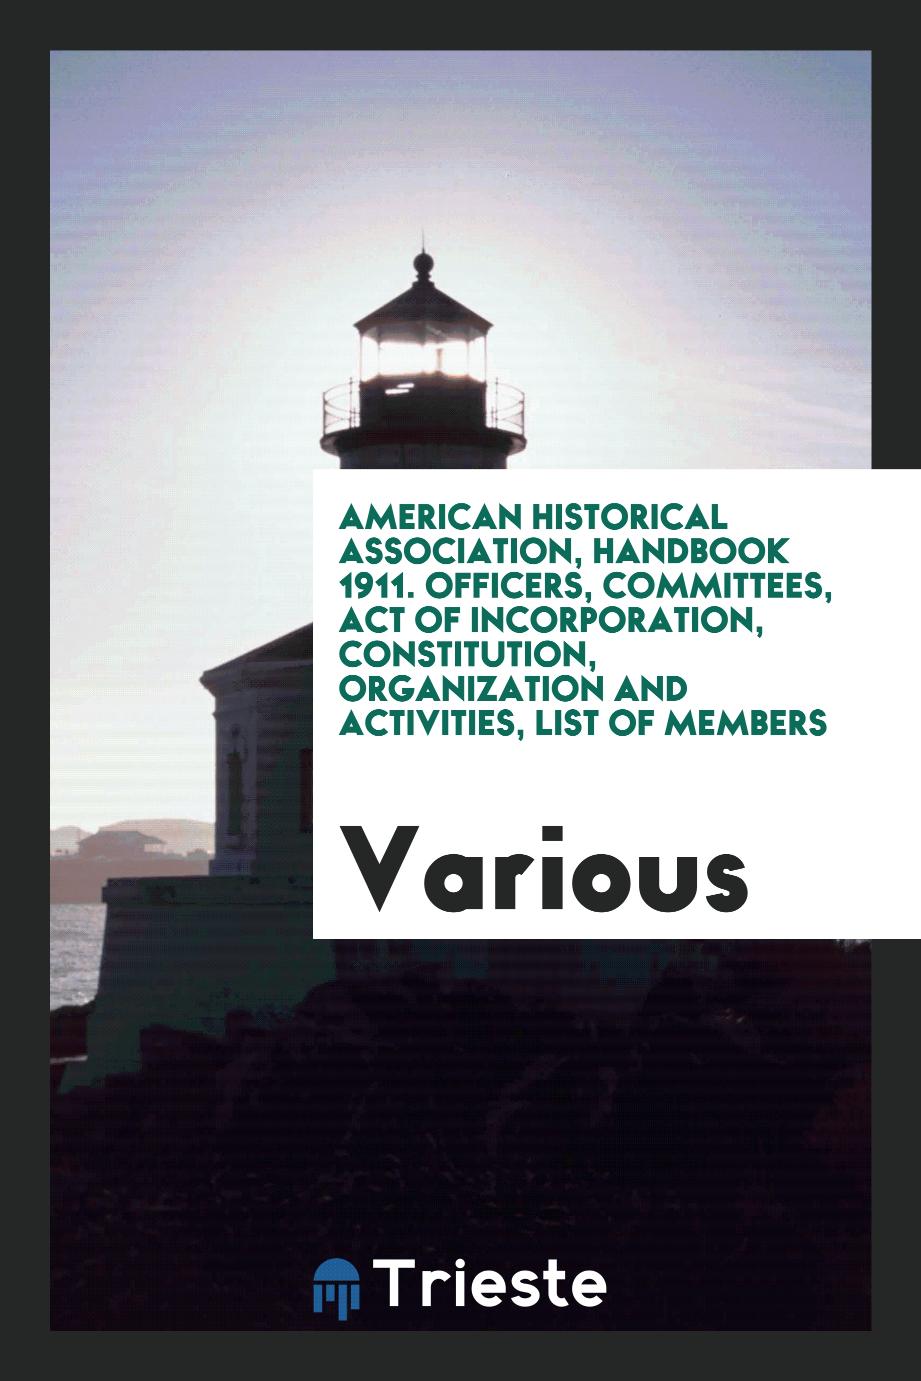 American Historical Association, Handbook 1911. Officers, Committees, Act of Incorporation, Constitution, Organization and Activities, List of Members